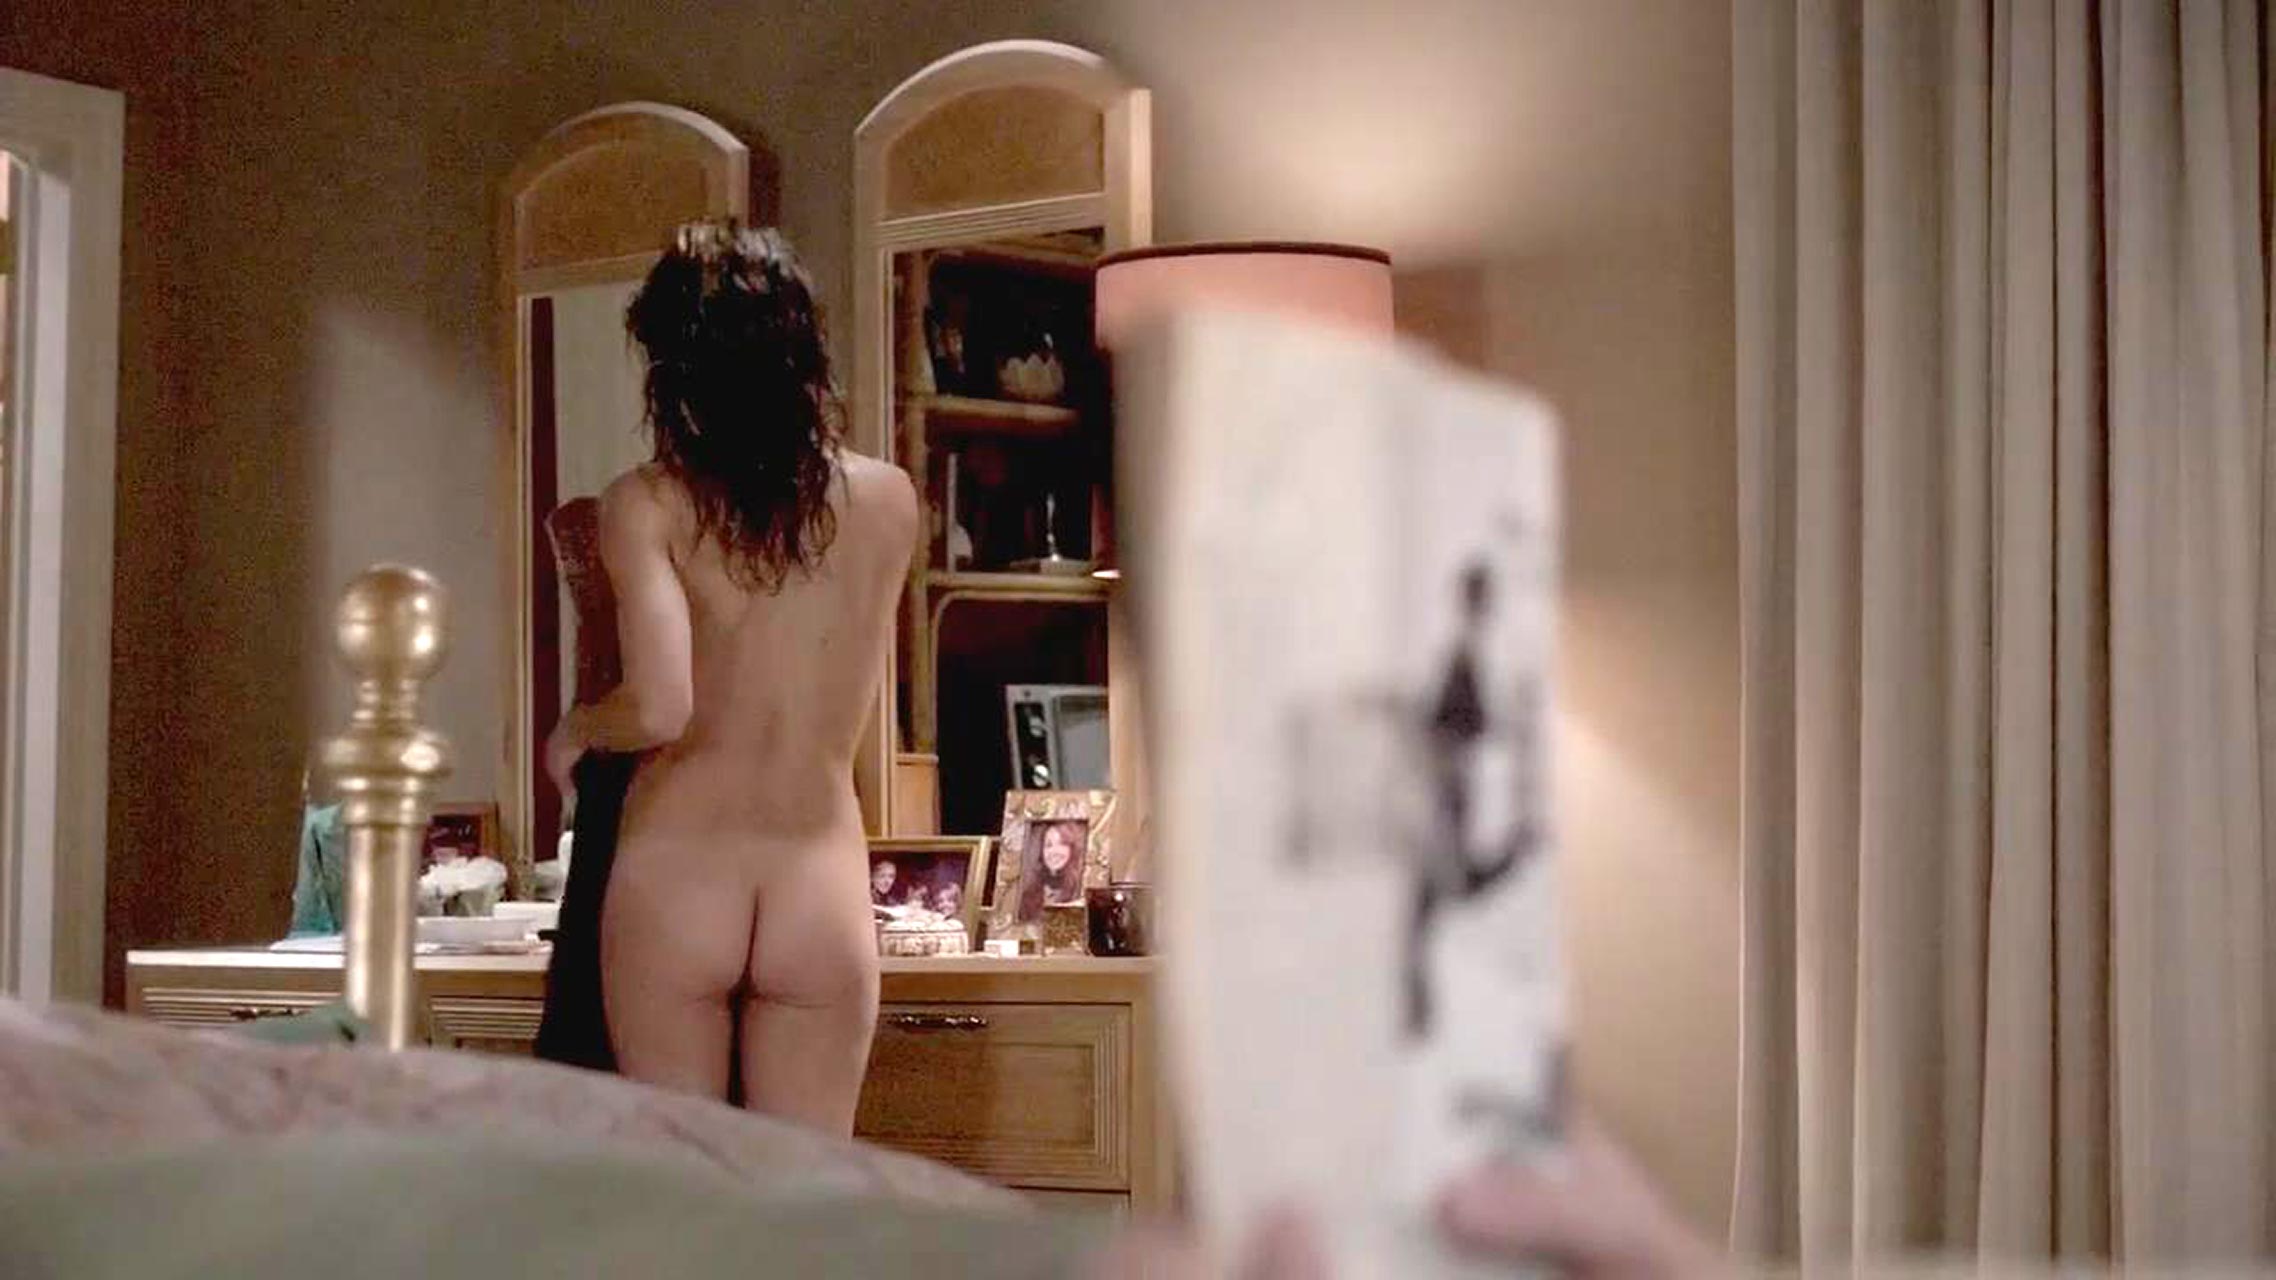 Russel nude kerry 'The Americans'